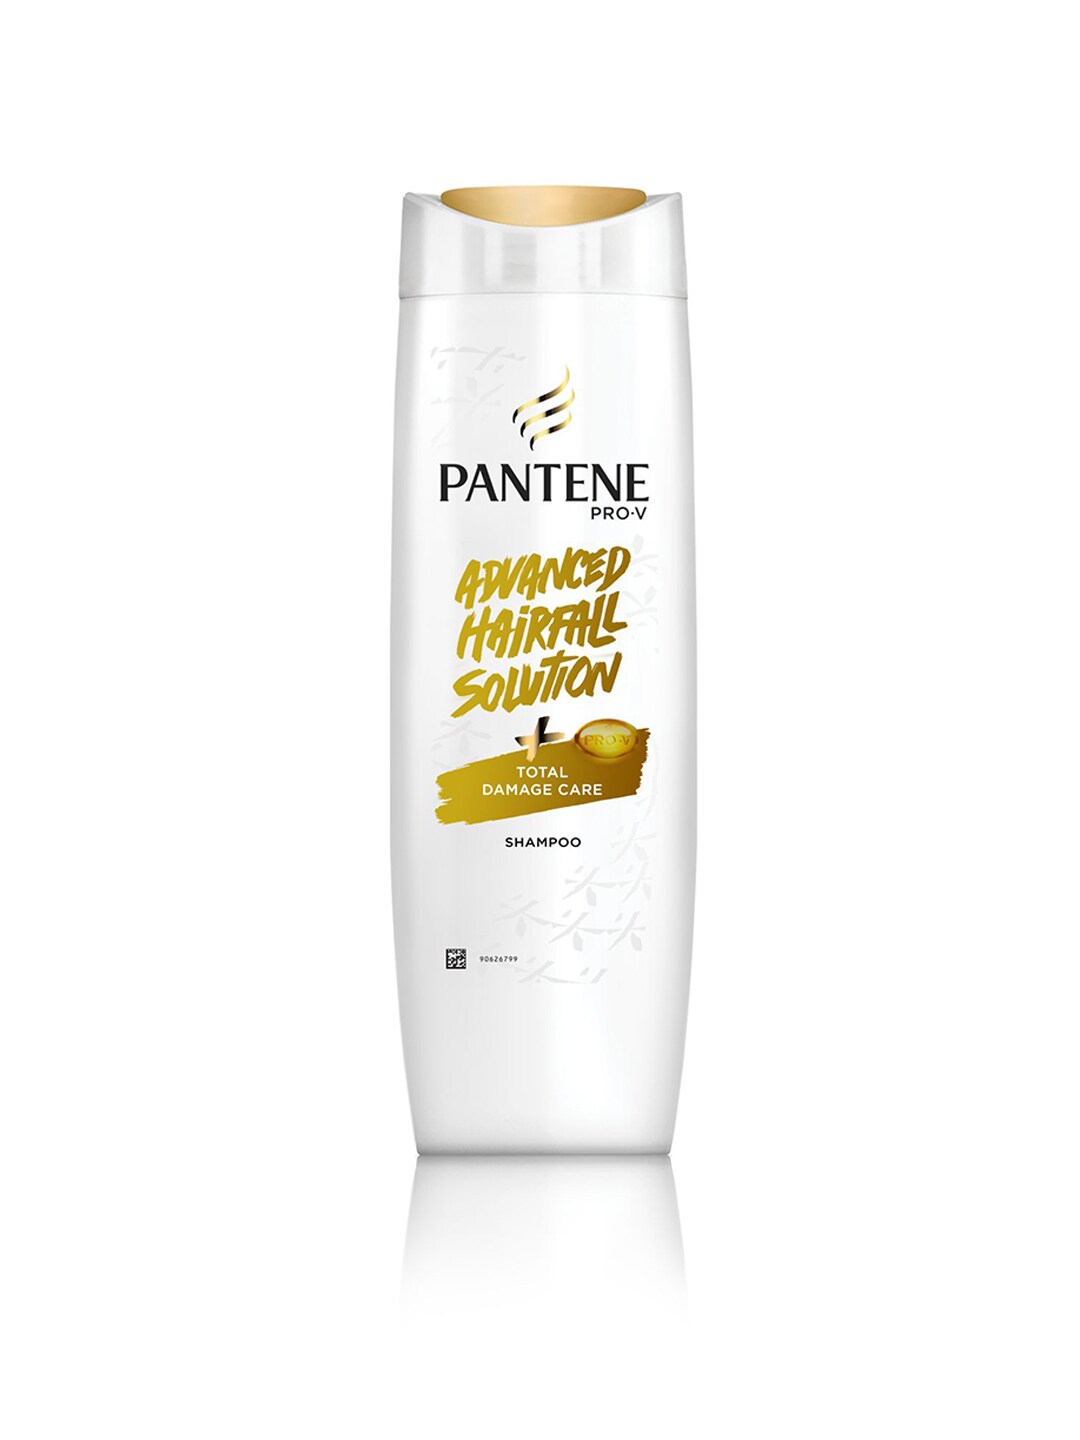 Pantene Unisex Advanced Hair Fall Solution+Total Damage Care Shampoo with Pro-Vit 340 ml Price in India